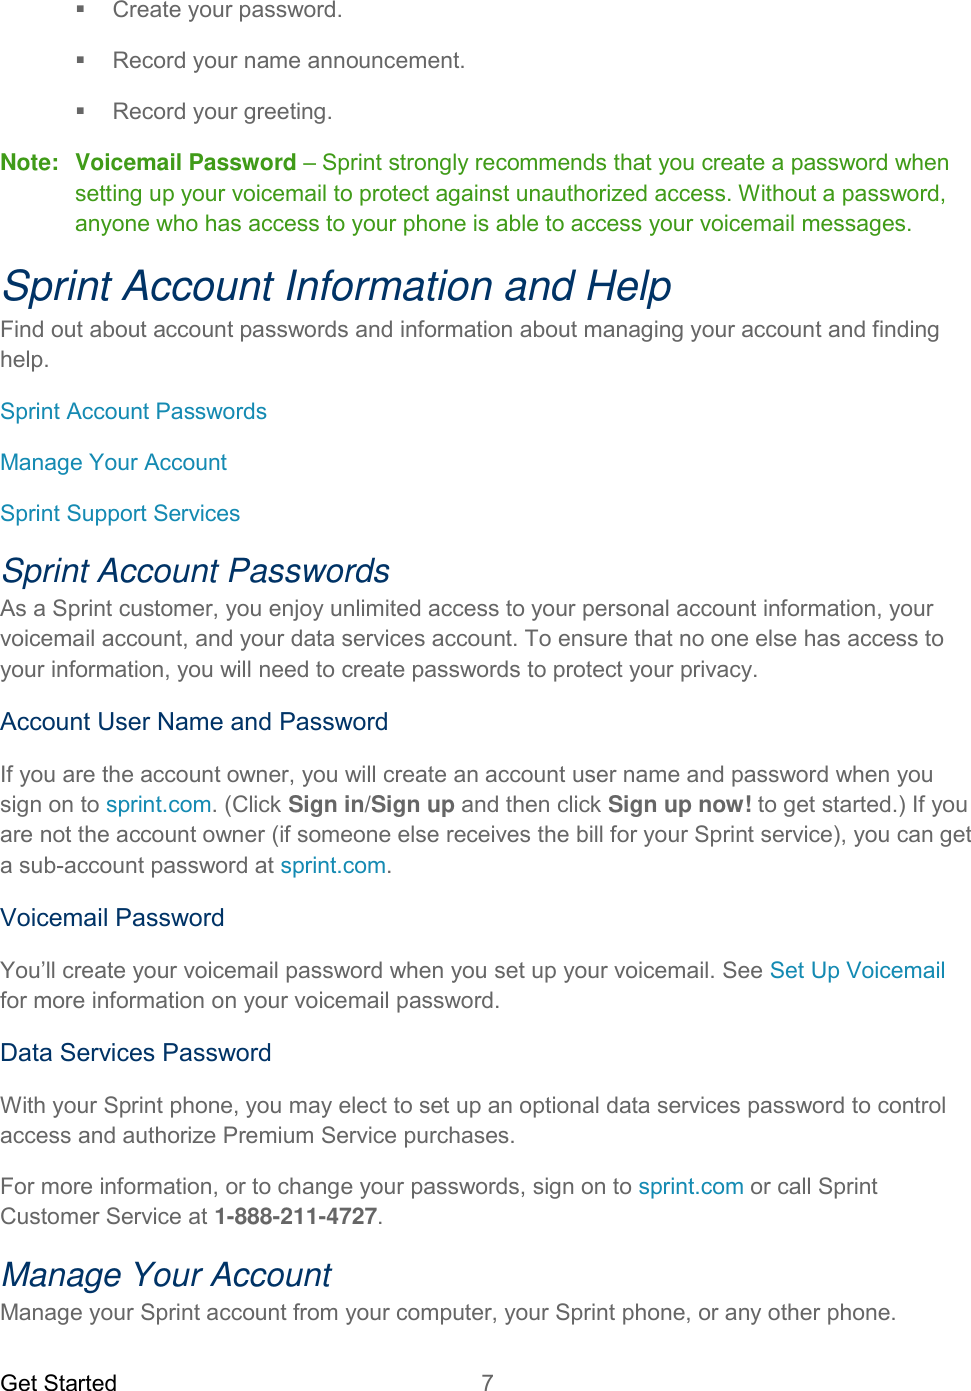 Get Started  7     Create your password.   Record your name announcement.   Record your greeting. Note:  Voicemail Password – Sprint strongly recommends that you create a password when setting up your voicemail to protect against unauthorized access. Without a password, anyone who has access to your phone is able to access your voicemail messages. Sprint Account Information and Help Find out about account passwords and information about managing your account and finding help. Sprint Account Passwords Manage Your Account Sprint Support Services Sprint Account Passwords As a Sprint customer, you enjoy unlimited access to your personal account information, your voicemail account, and your data services account. To ensure that no one else has access to your information, you will need to create passwords to protect your privacy. Account User Name and Password If you are the account owner, you will create an account user name and password when you sign on to sprint.com. (Click Sign in/Sign up and then click Sign up now! to get started.) If you are not the account owner (if someone else receives the bill for your Sprint service), you can get a sub-account password at sprint.com. Voicemail Password You’ll create your voicemail password when you set up your voicemail. See Set Up Voicemail for more information on your voicemail password. Data Services Password With your Sprint phone, you may elect to set up an optional data services password to control access and authorize Premium Service purchases. For more information, or to change your passwords, sign on to sprint.com or call Sprint Customer Service at 1-888-211-4727. Manage Your Account Manage your Sprint account from your computer, your Sprint phone, or any other phone. 